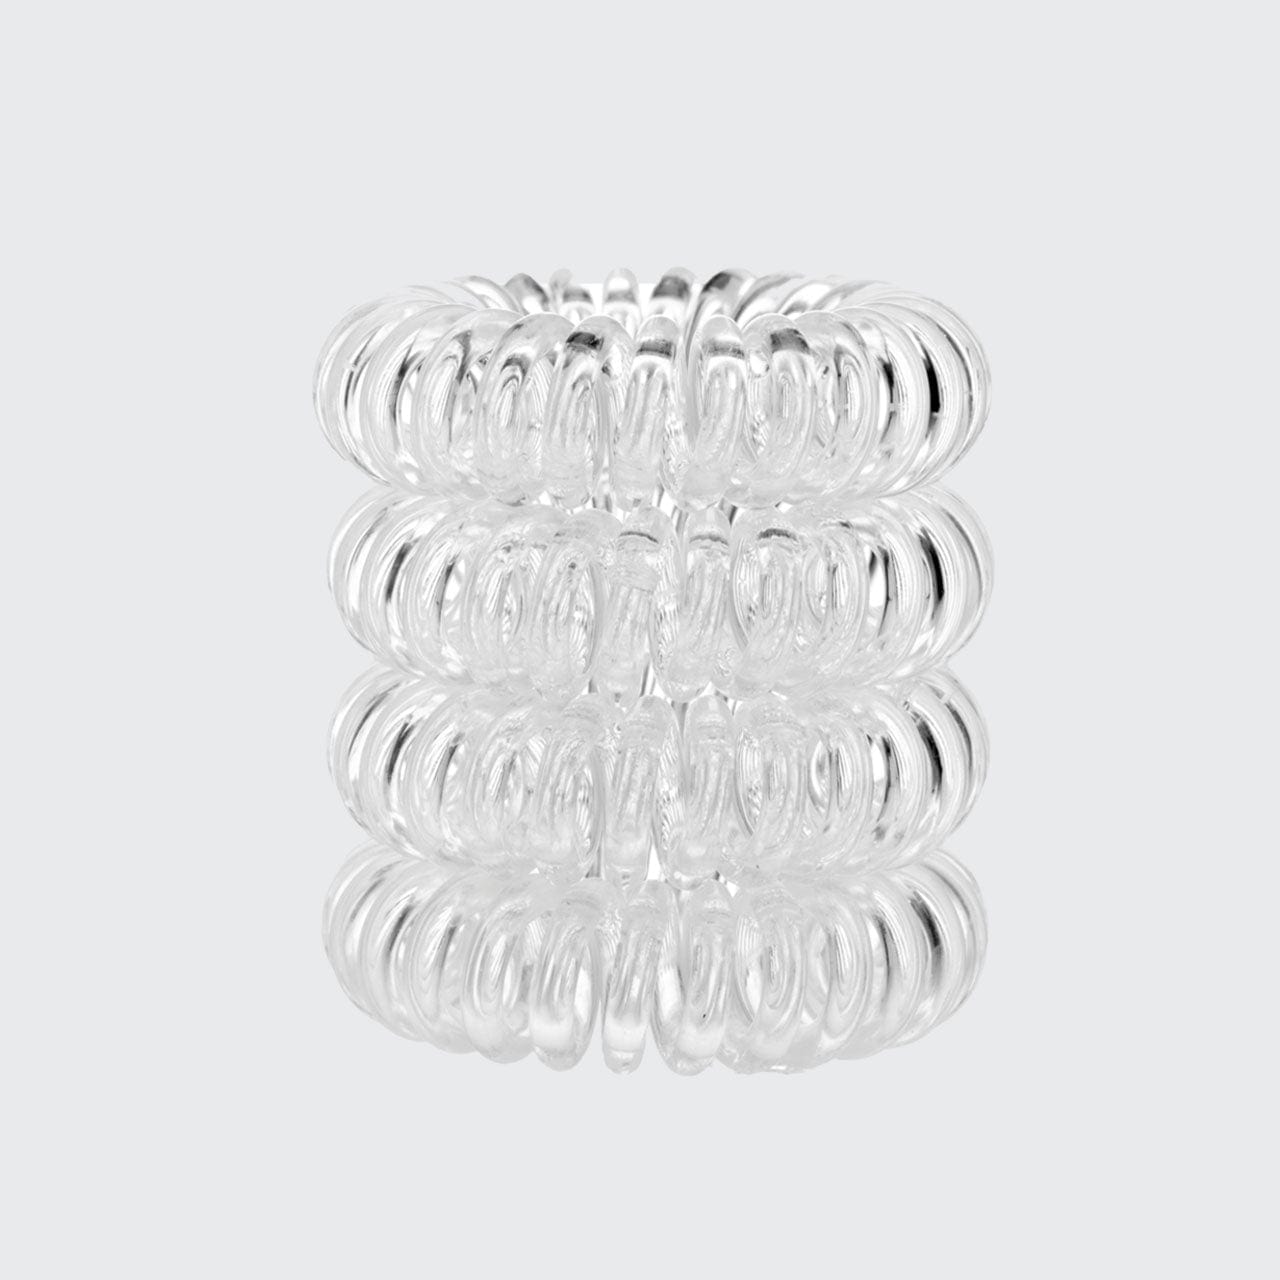 Spiral Hair Ties 4 Pc - Clear by KITSCH